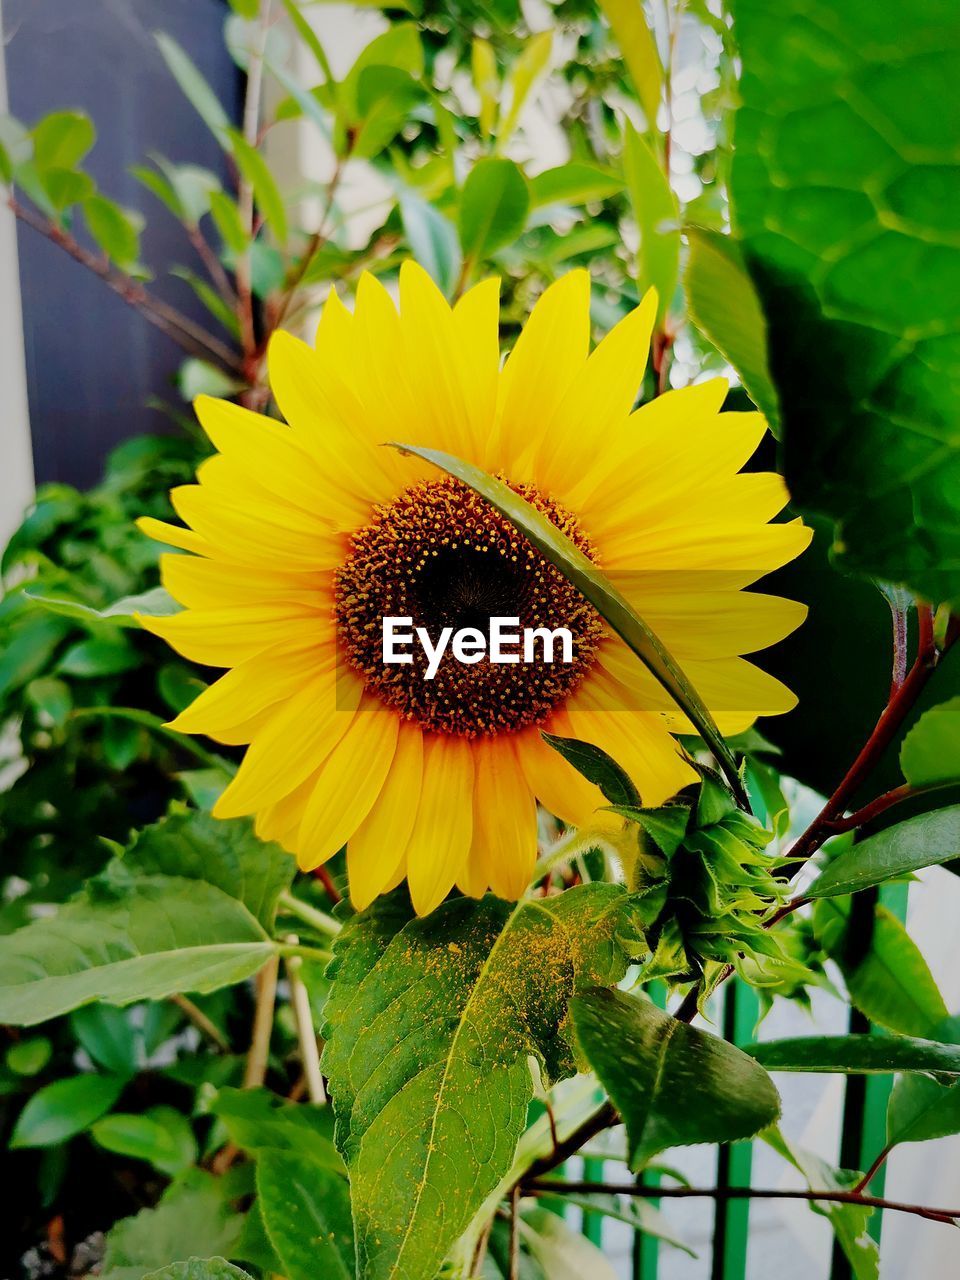 plant, sunflower, flower, flowering plant, freshness, growth, flower head, beauty in nature, yellow, plant part, leaf, nature, petal, inflorescence, fragility, close-up, no people, sunflower seed, pollen, green, outdoors, landscape, agriculture, botany, day, focus on foreground, summer, rural scene, land, blossom, field